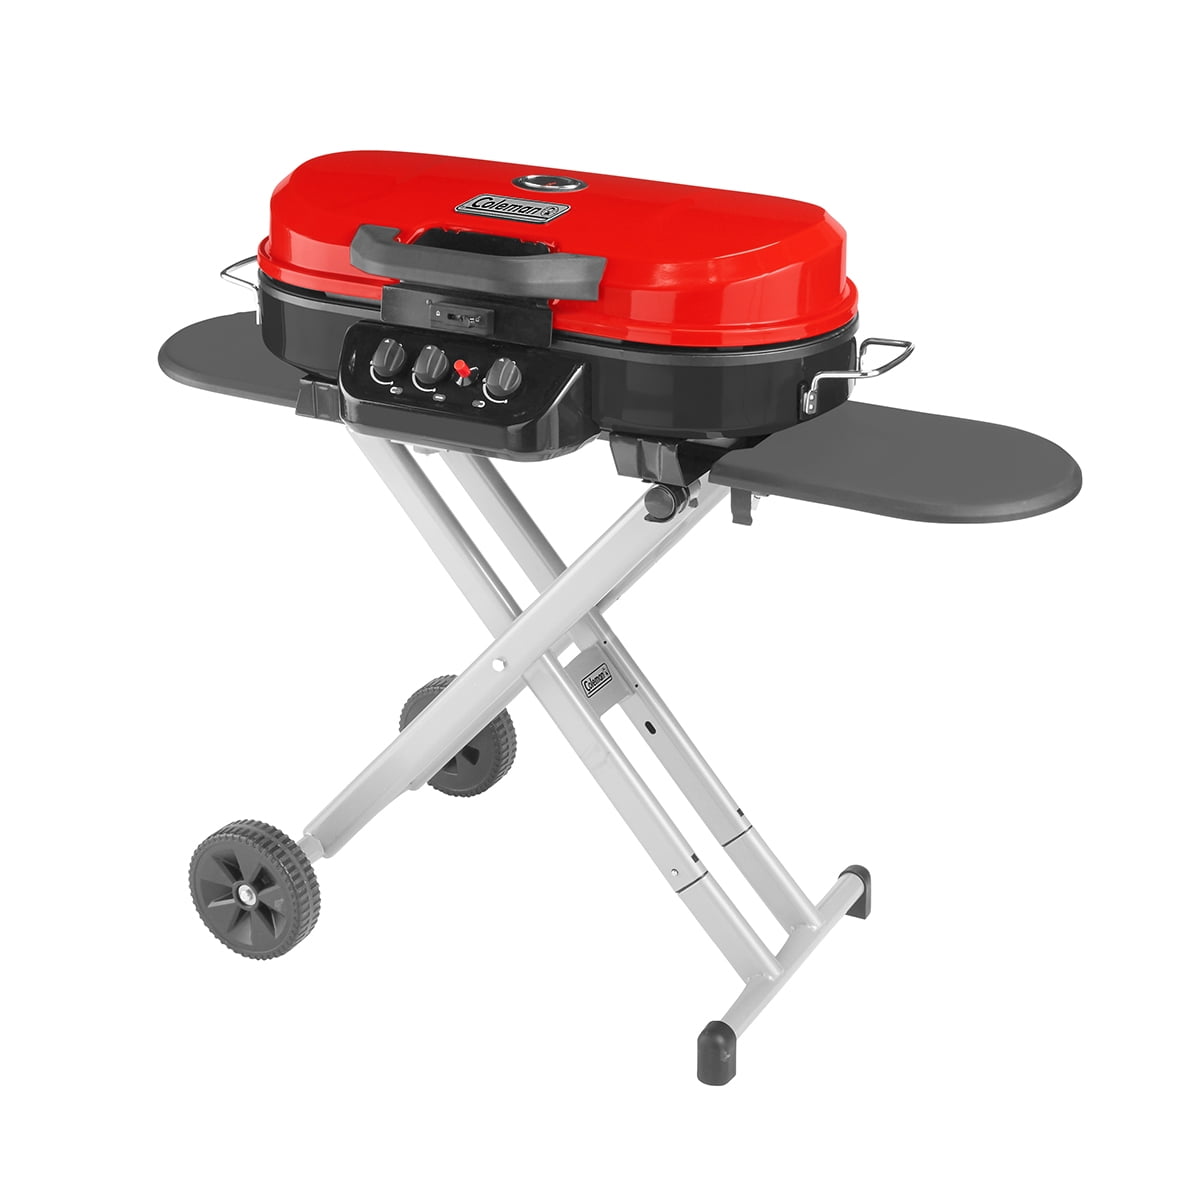 20,000-BTU Coleman Roadtrip 285 Portable Stand-Up Propane Grill w/ Wheels, Collapsable Legs, & 2 Side Tables (Red or Green) $199 + Free Shipping $198.98